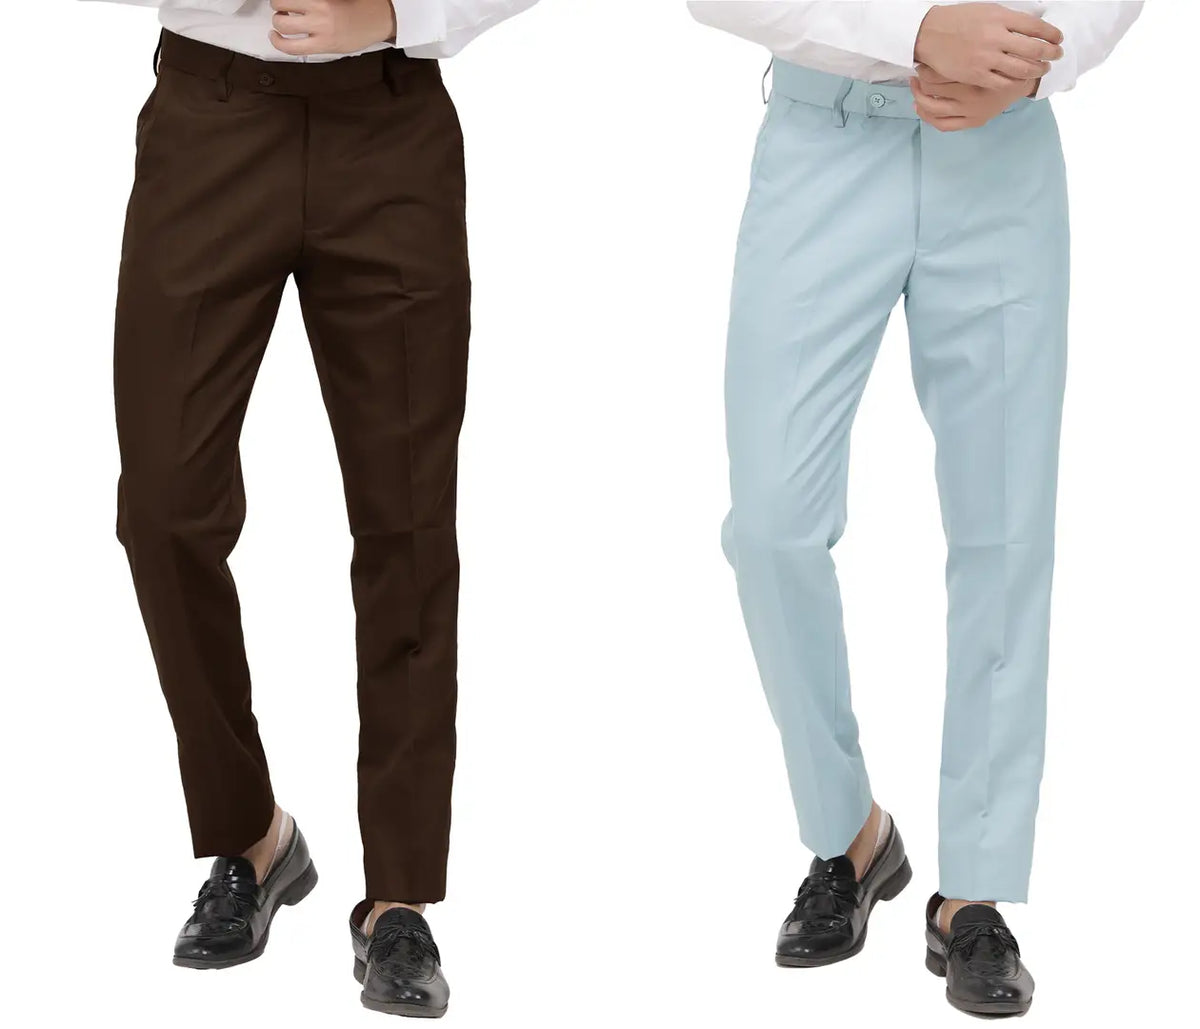 Kundan Men Poly-Viscose Blended Dark Brown and Light Sky Blue Formal Trousers ( Pack of 2 Trousers )